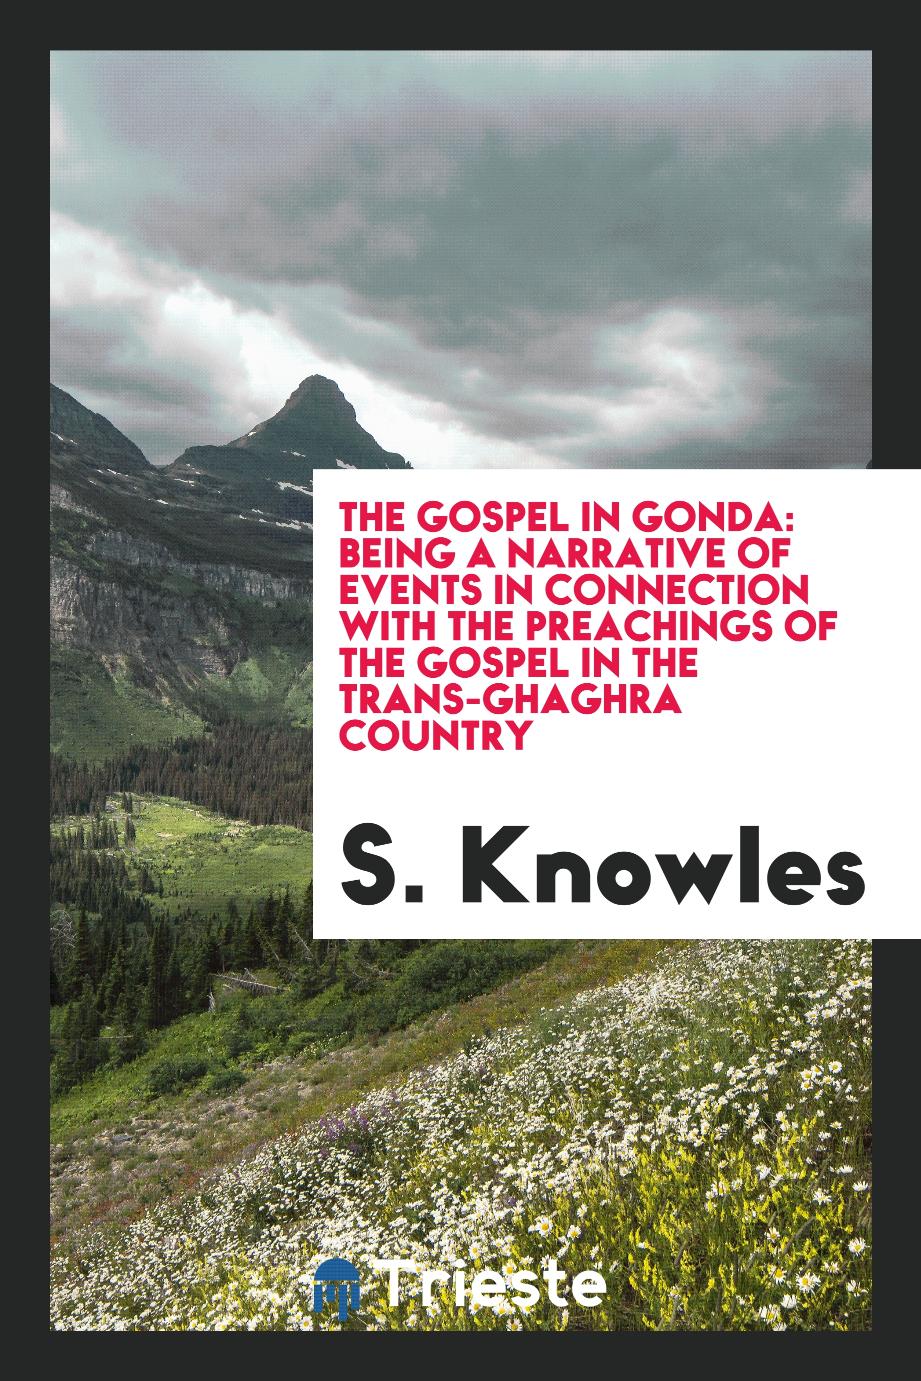 The gospel in Gonda: being a narrative of events in connection with the preachings of the gospel in the trans-Ghaghra country